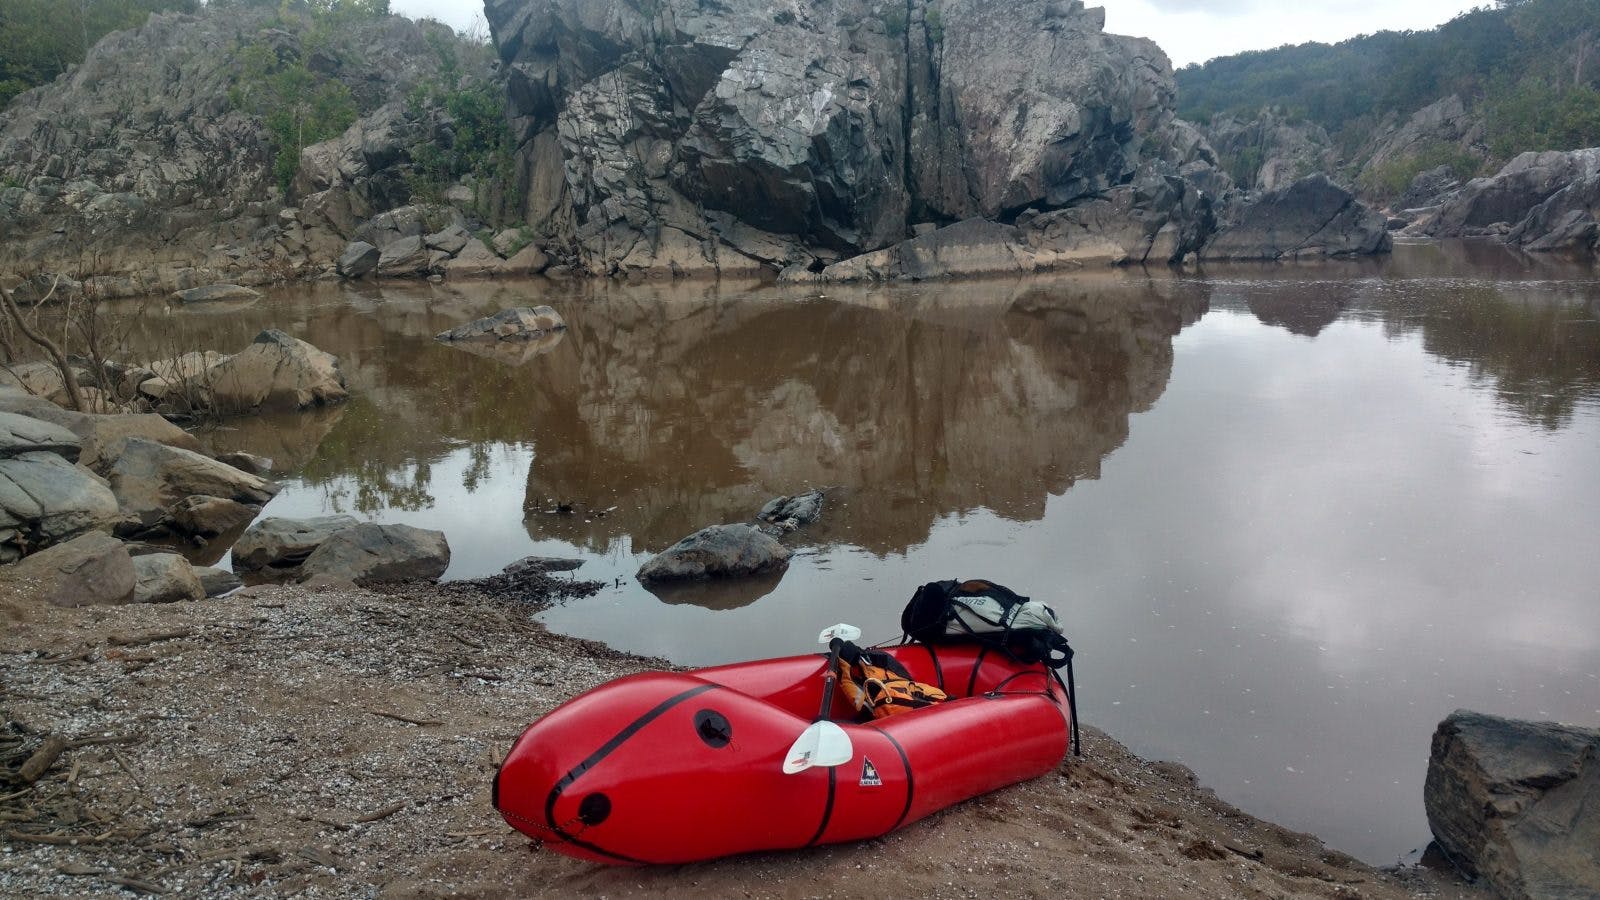 Packrafting Mather Gorge on the Potomac River, at the base of Great Falls